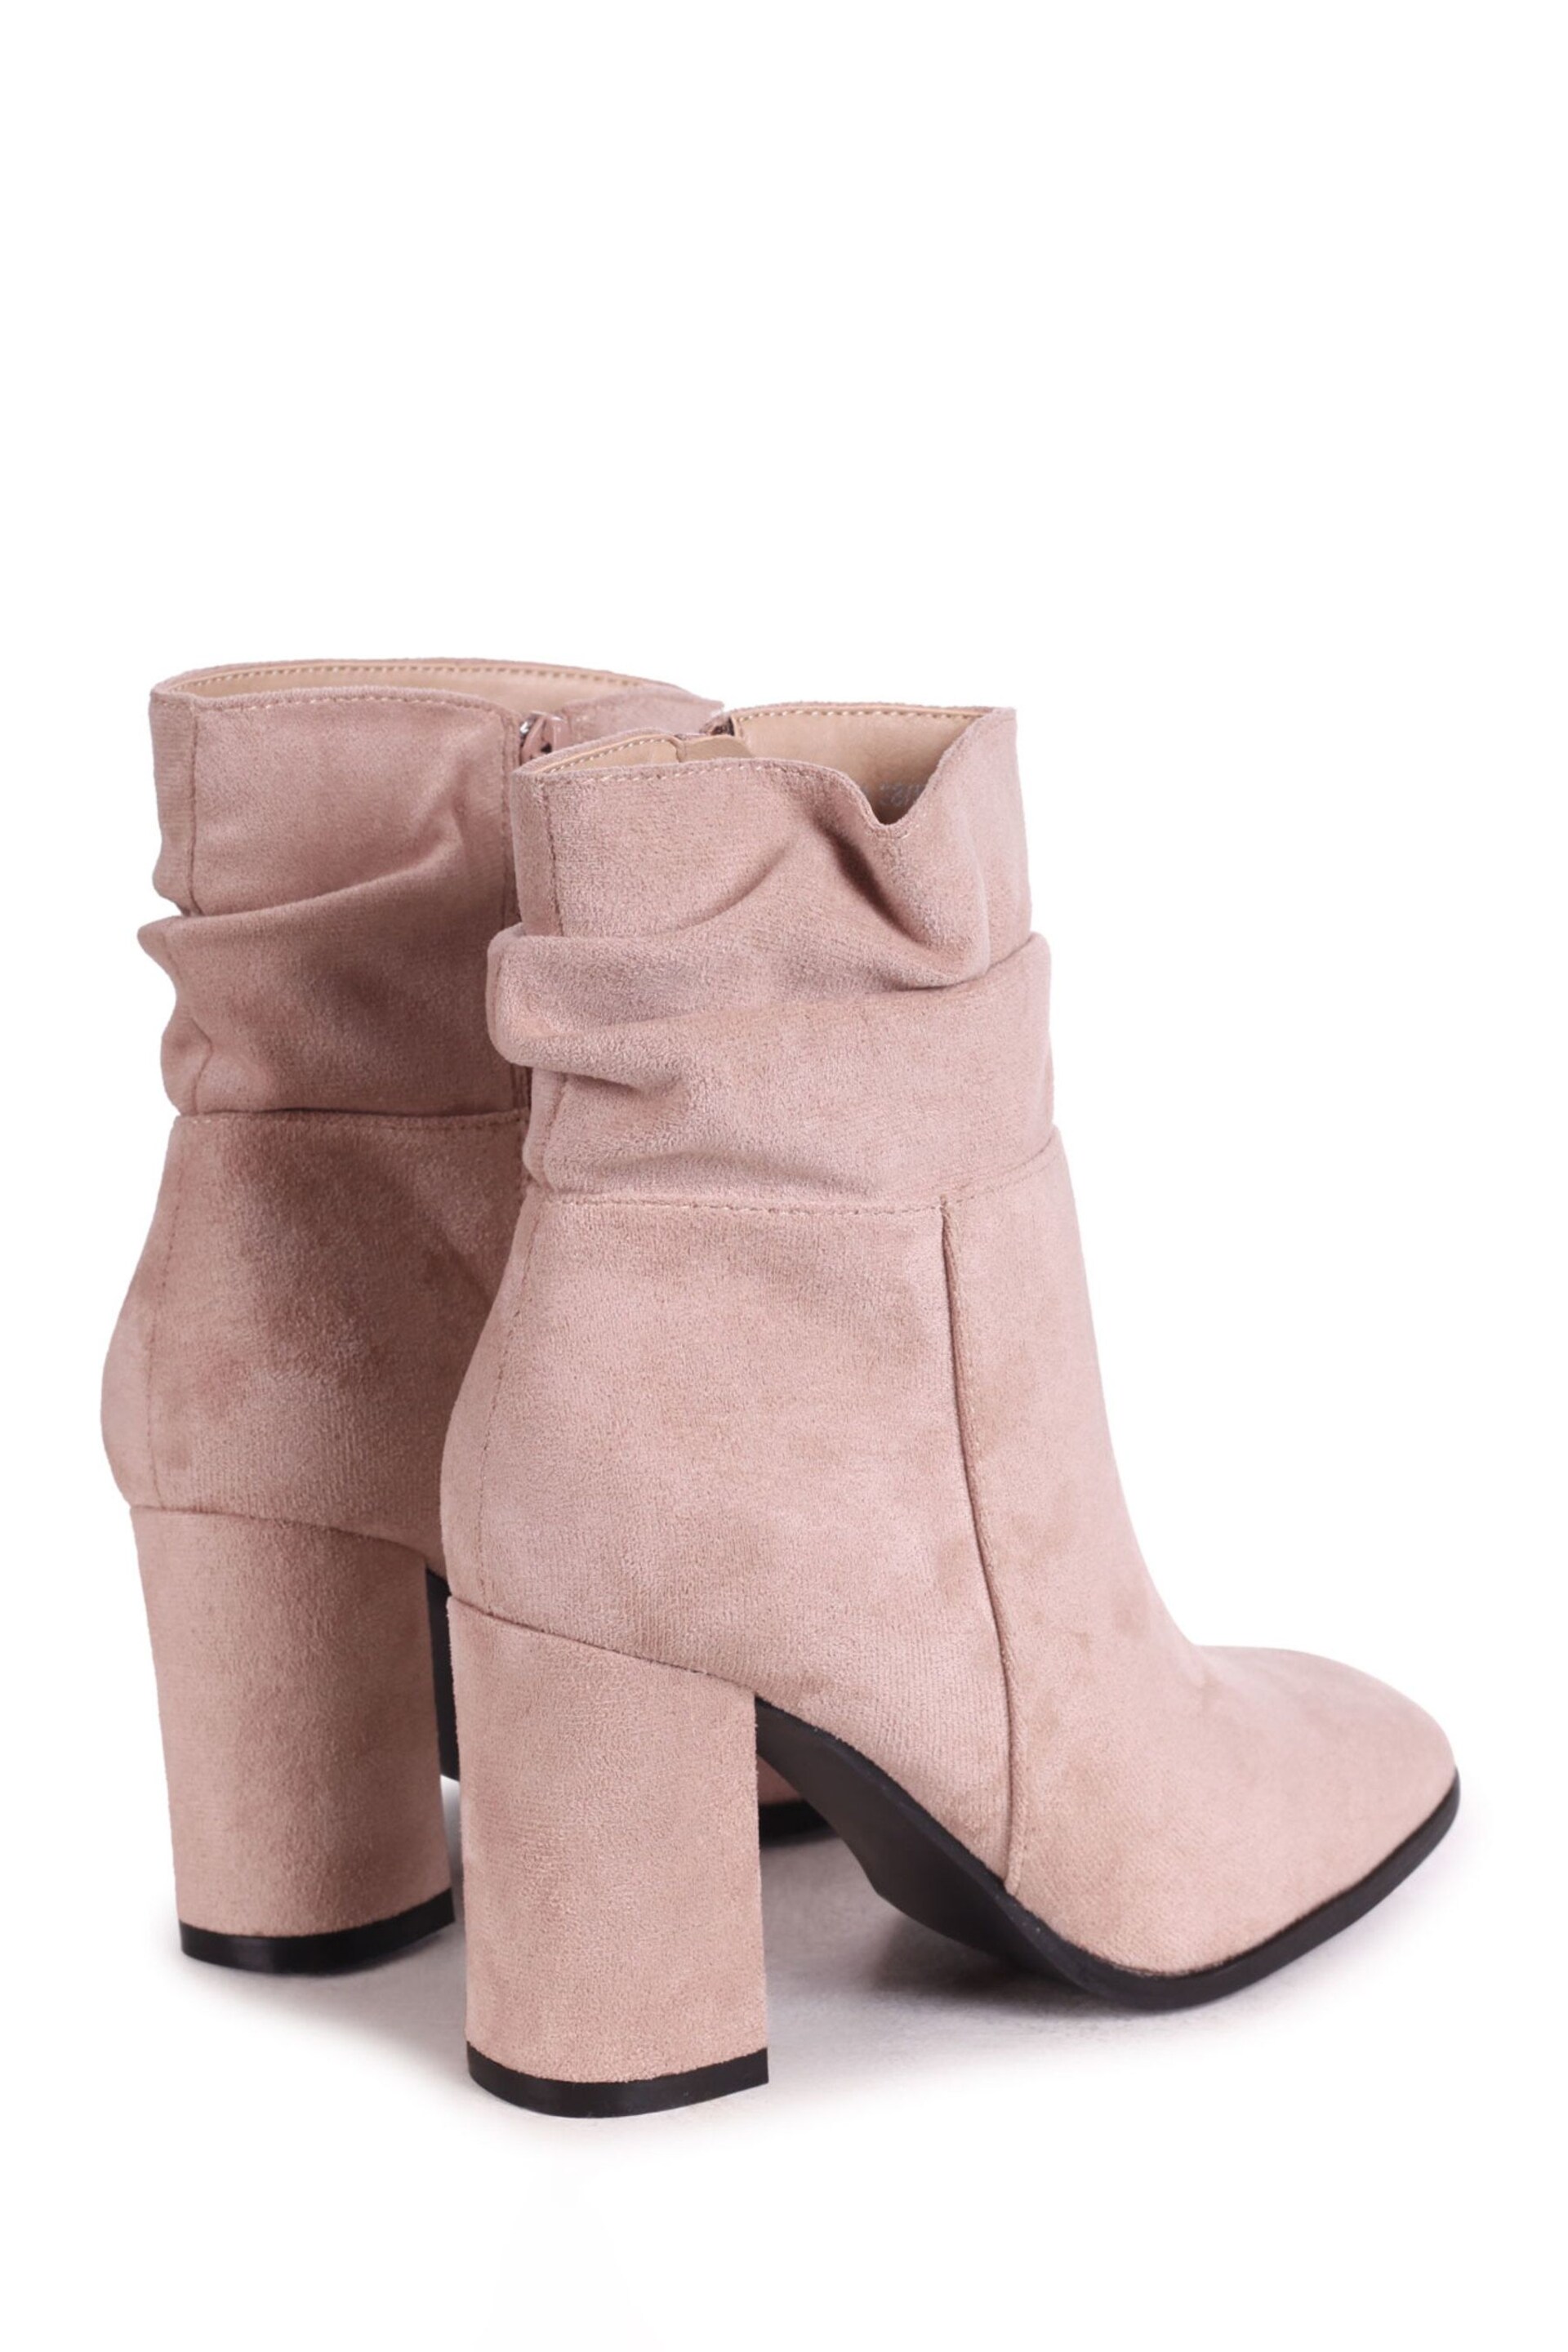 Linzi Cream Mila Faux Suede Ruched Square Toe Block Heel Boots - Image 4 of 4